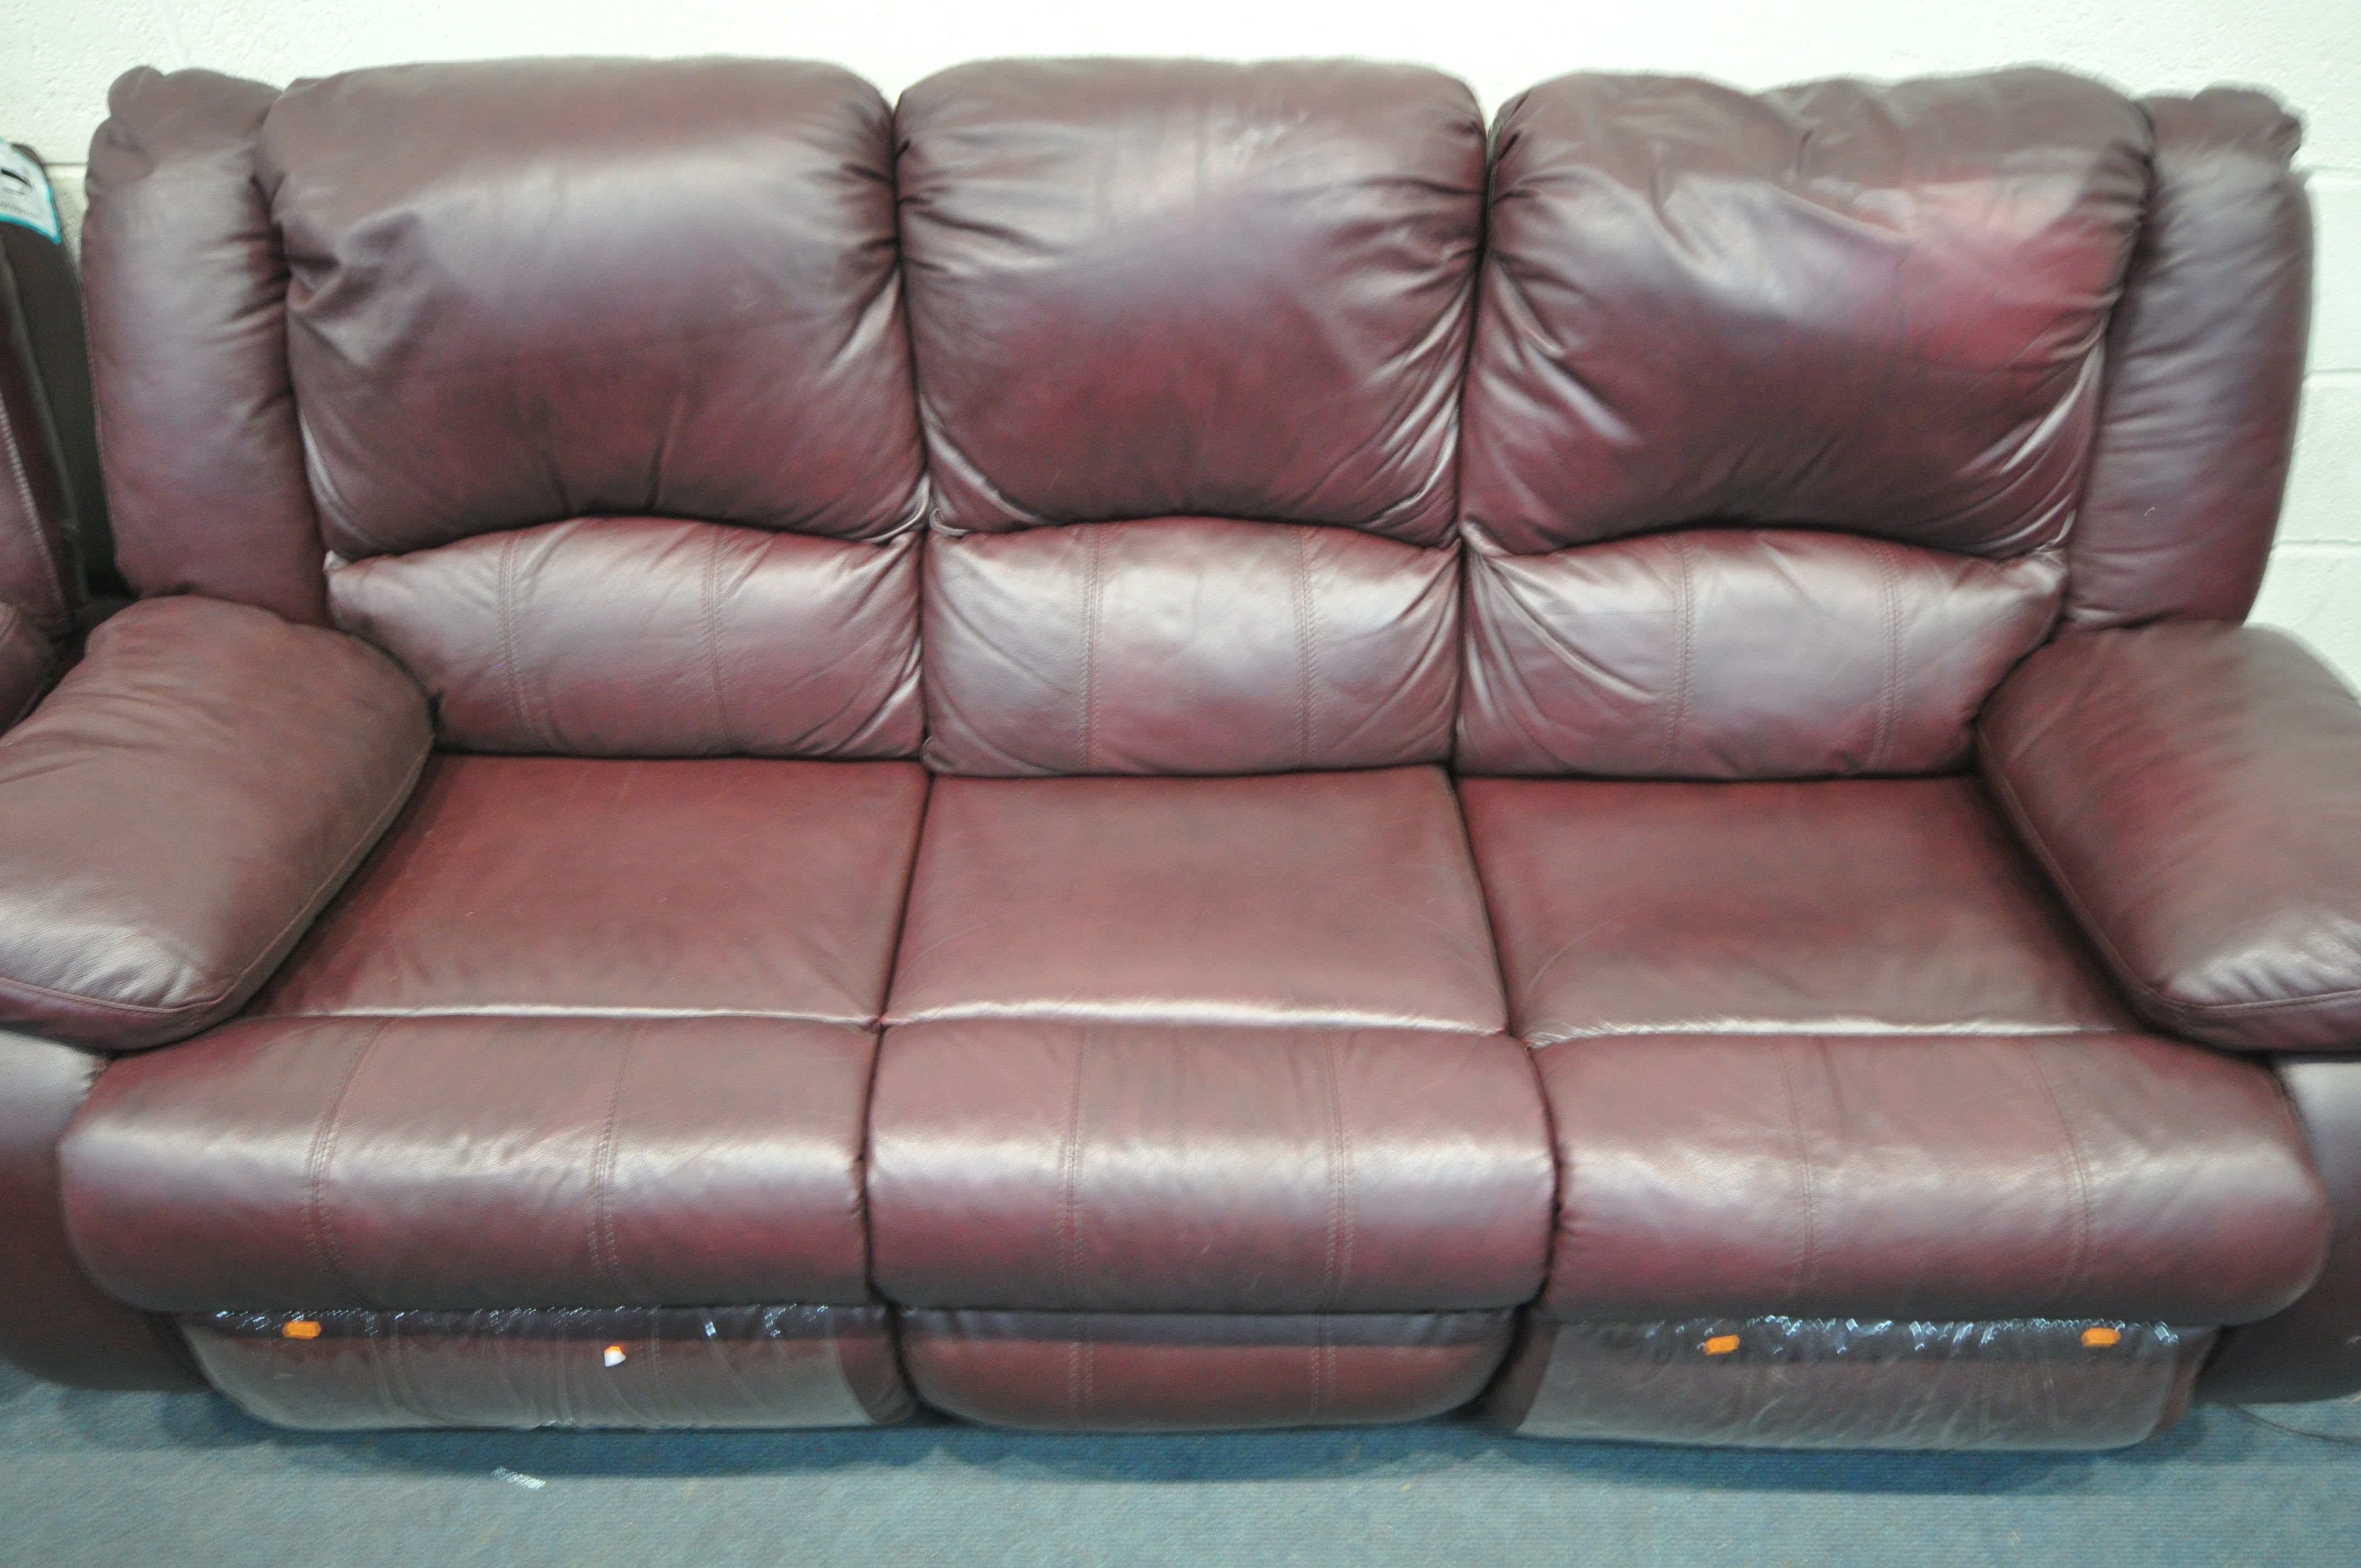 A PLUM COLORED LEATHERETTE THREE SEATER MANUAL RECLINING CHAIR, along with a matching rocking - Image 2 of 3